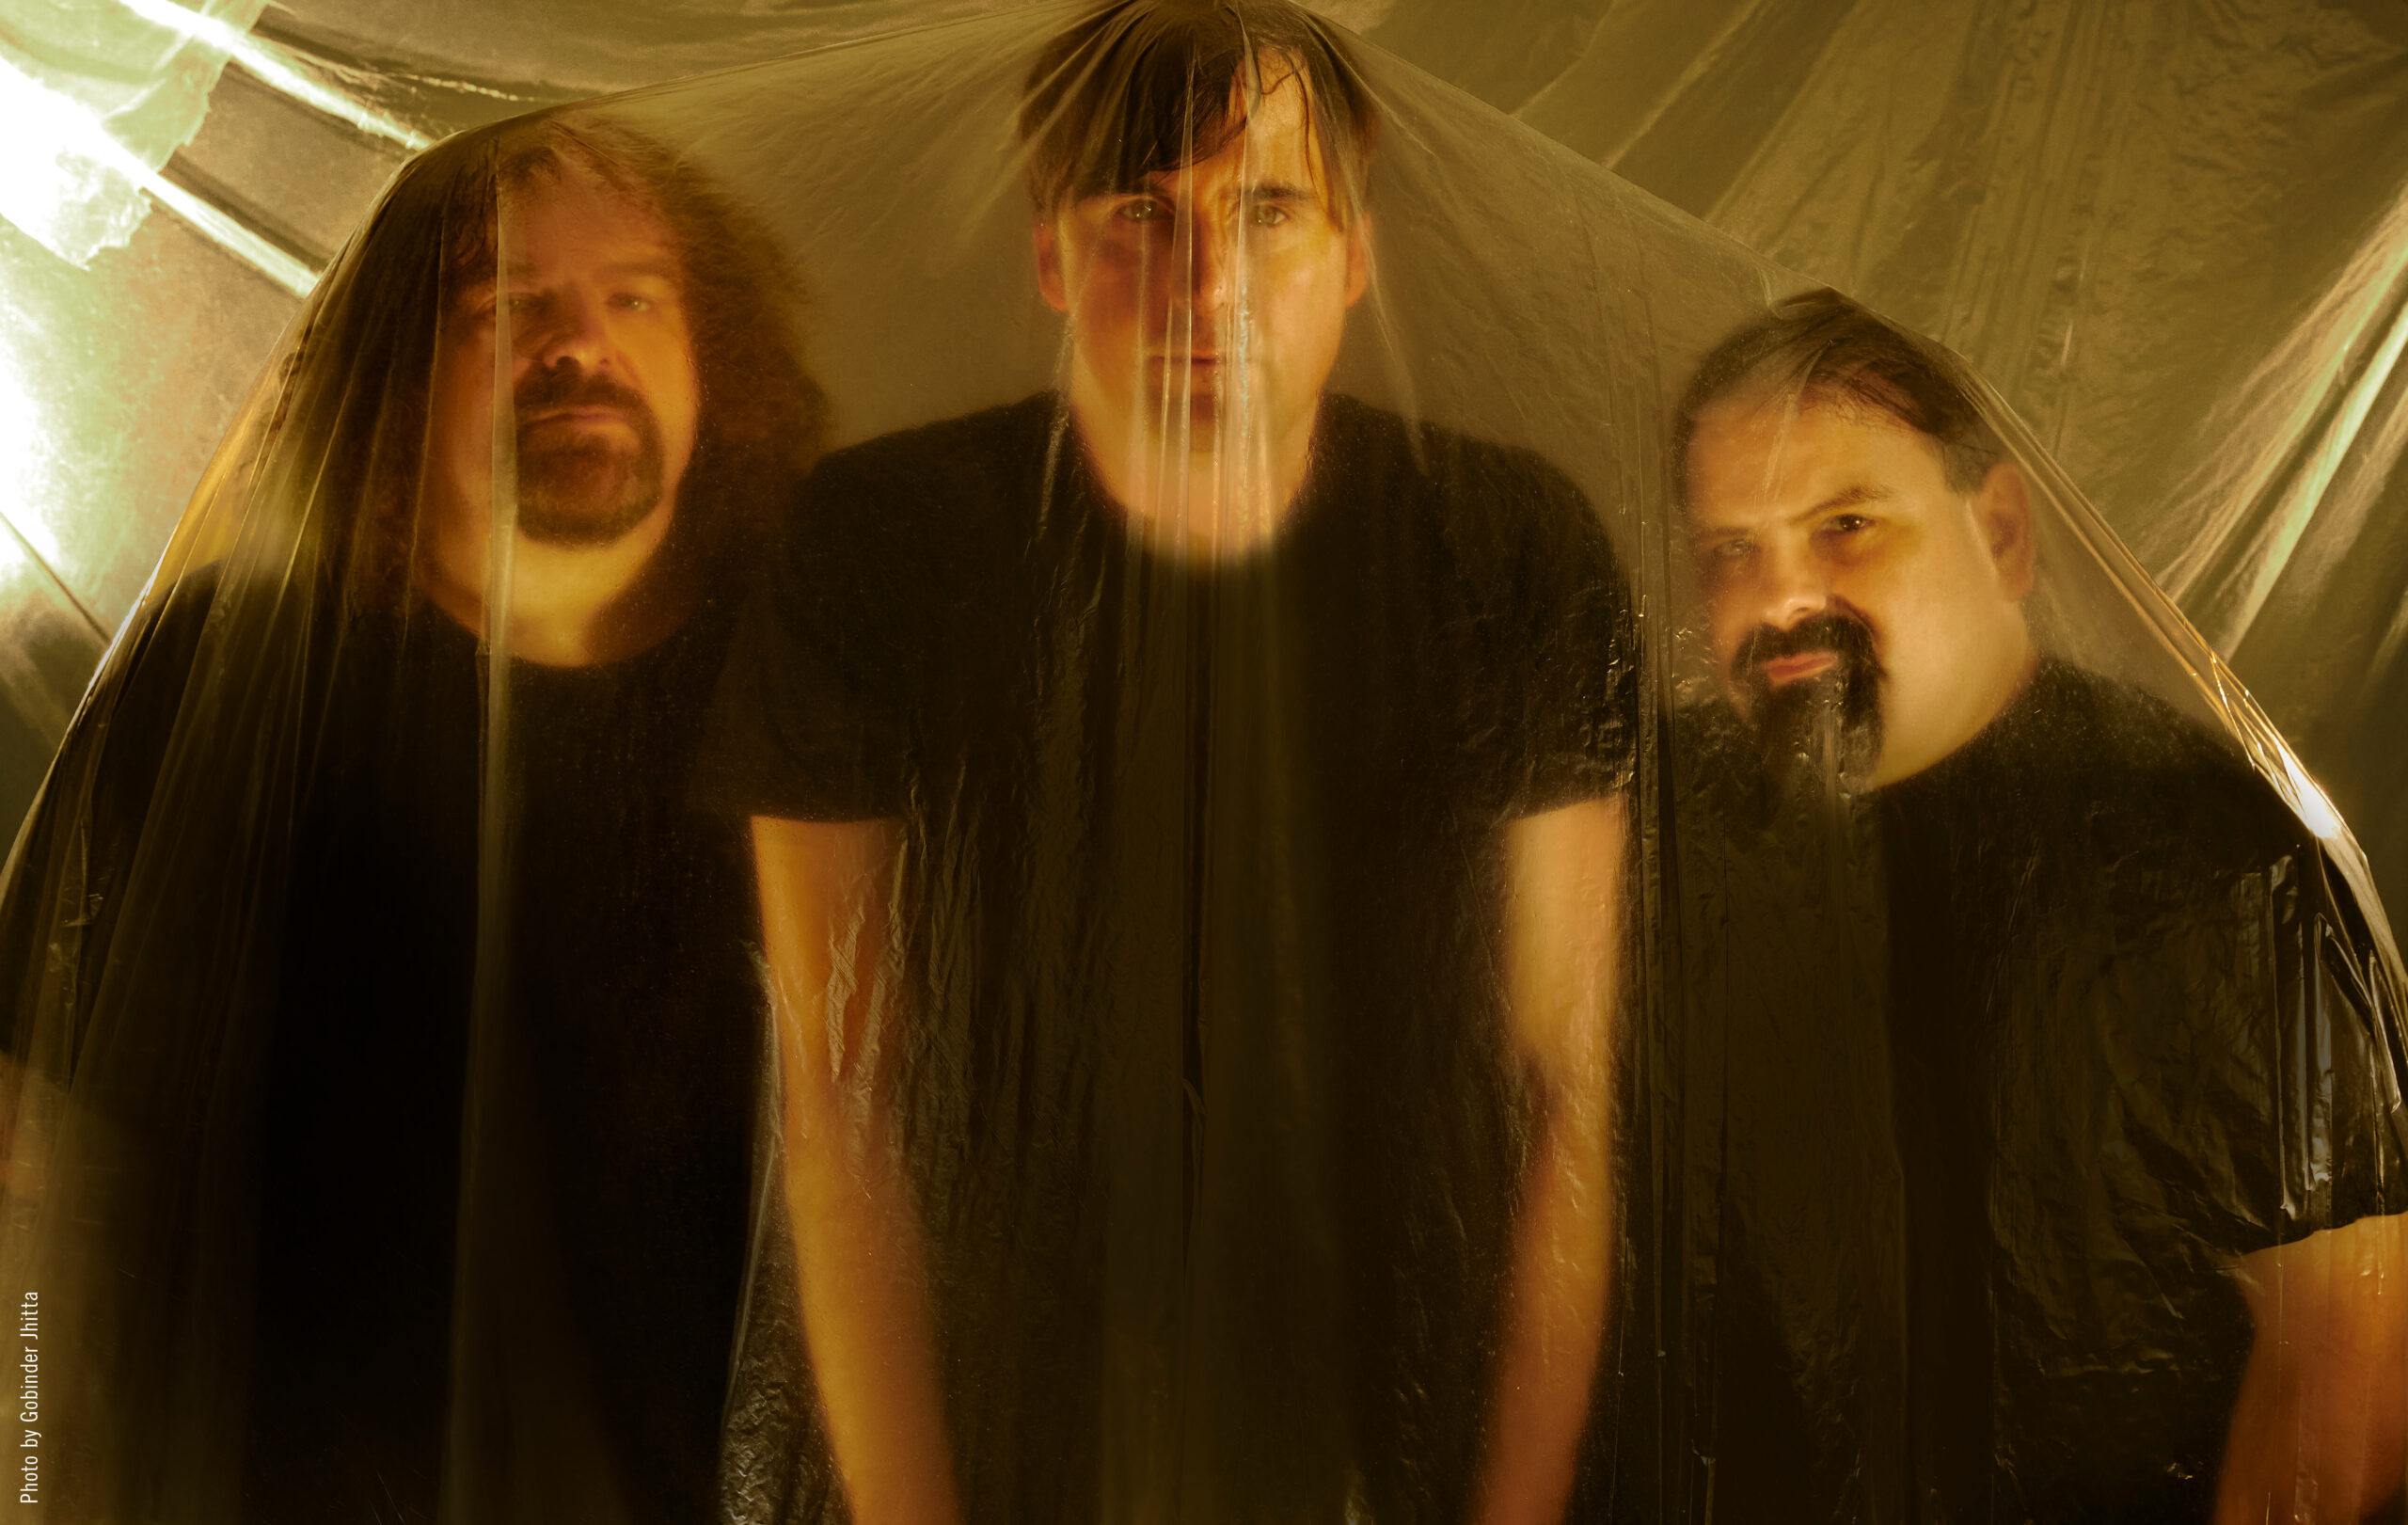 NAPALM DEATH ANNOUNCE NEW ALBUM, THROES OF JOY IN THE JAWS OF DEFEATISM